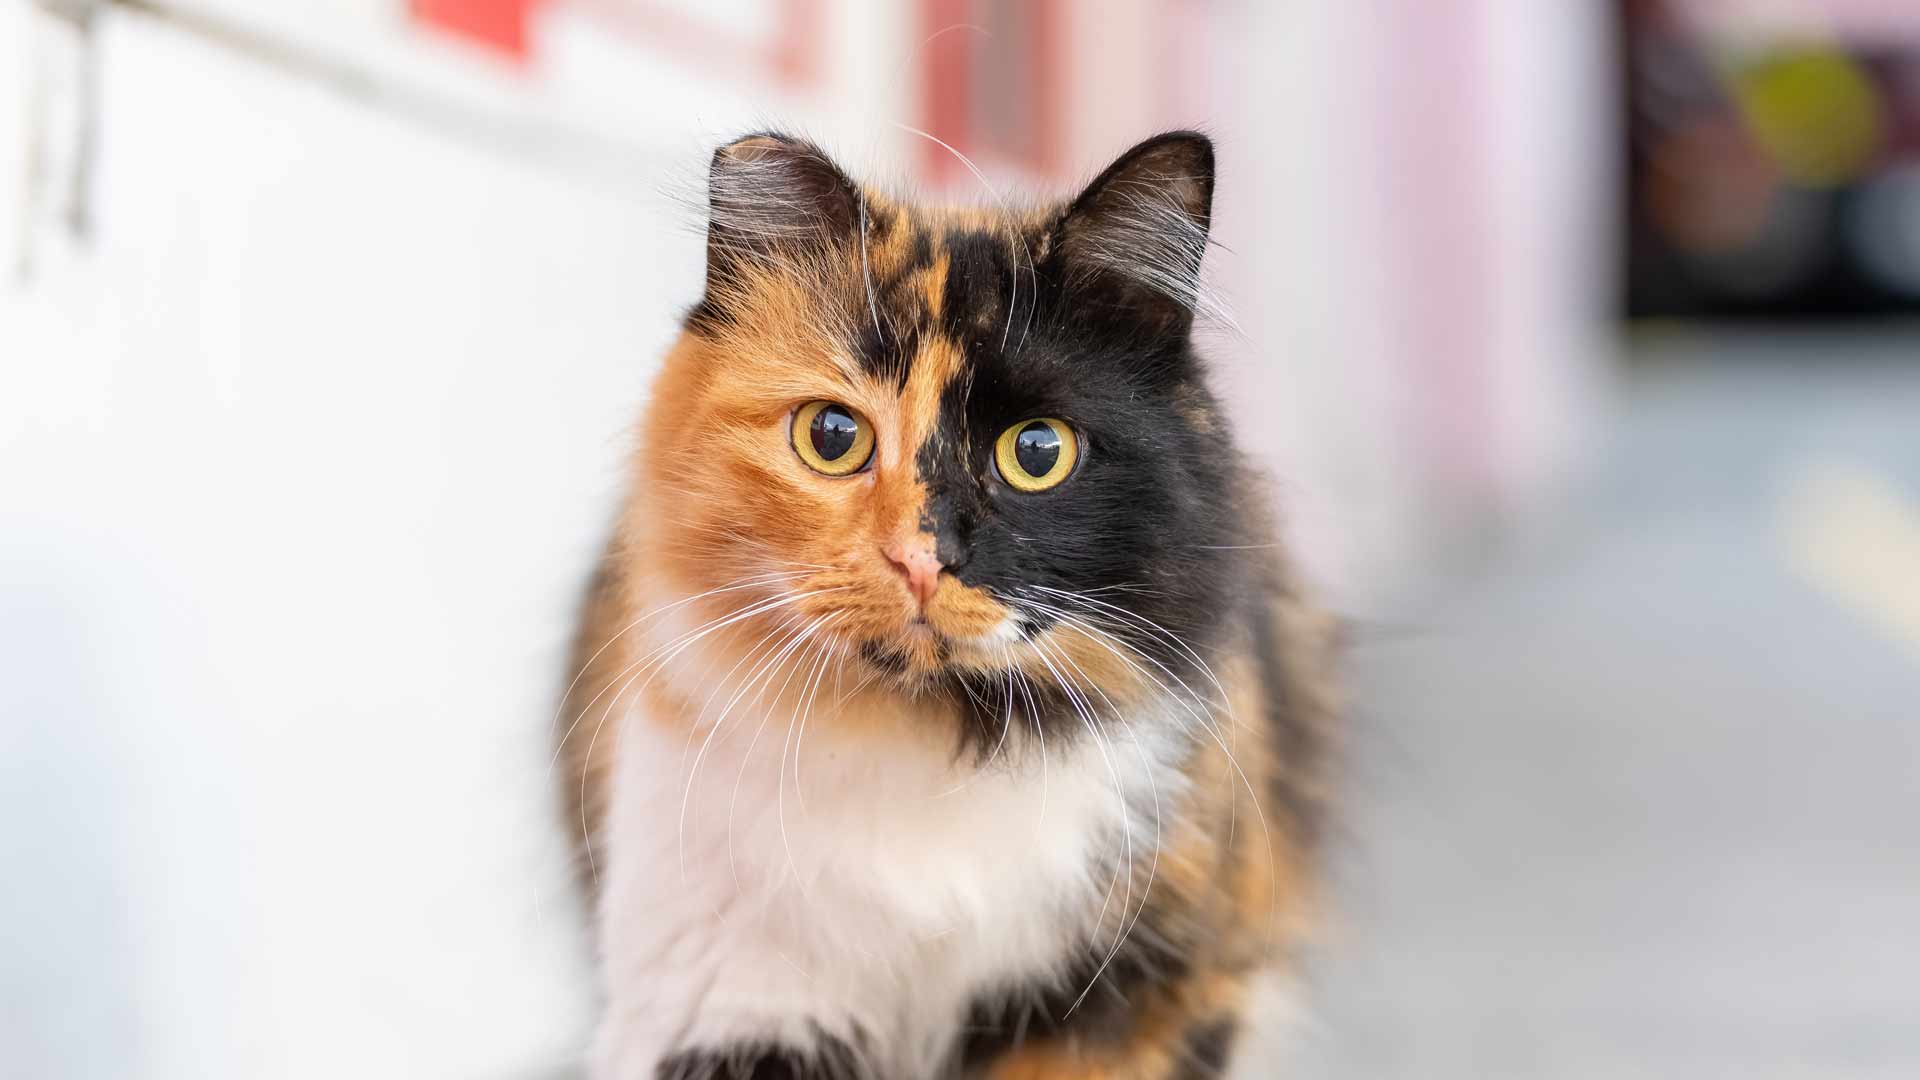 Cute Pictures & Facts About Calico Cats & Kittens